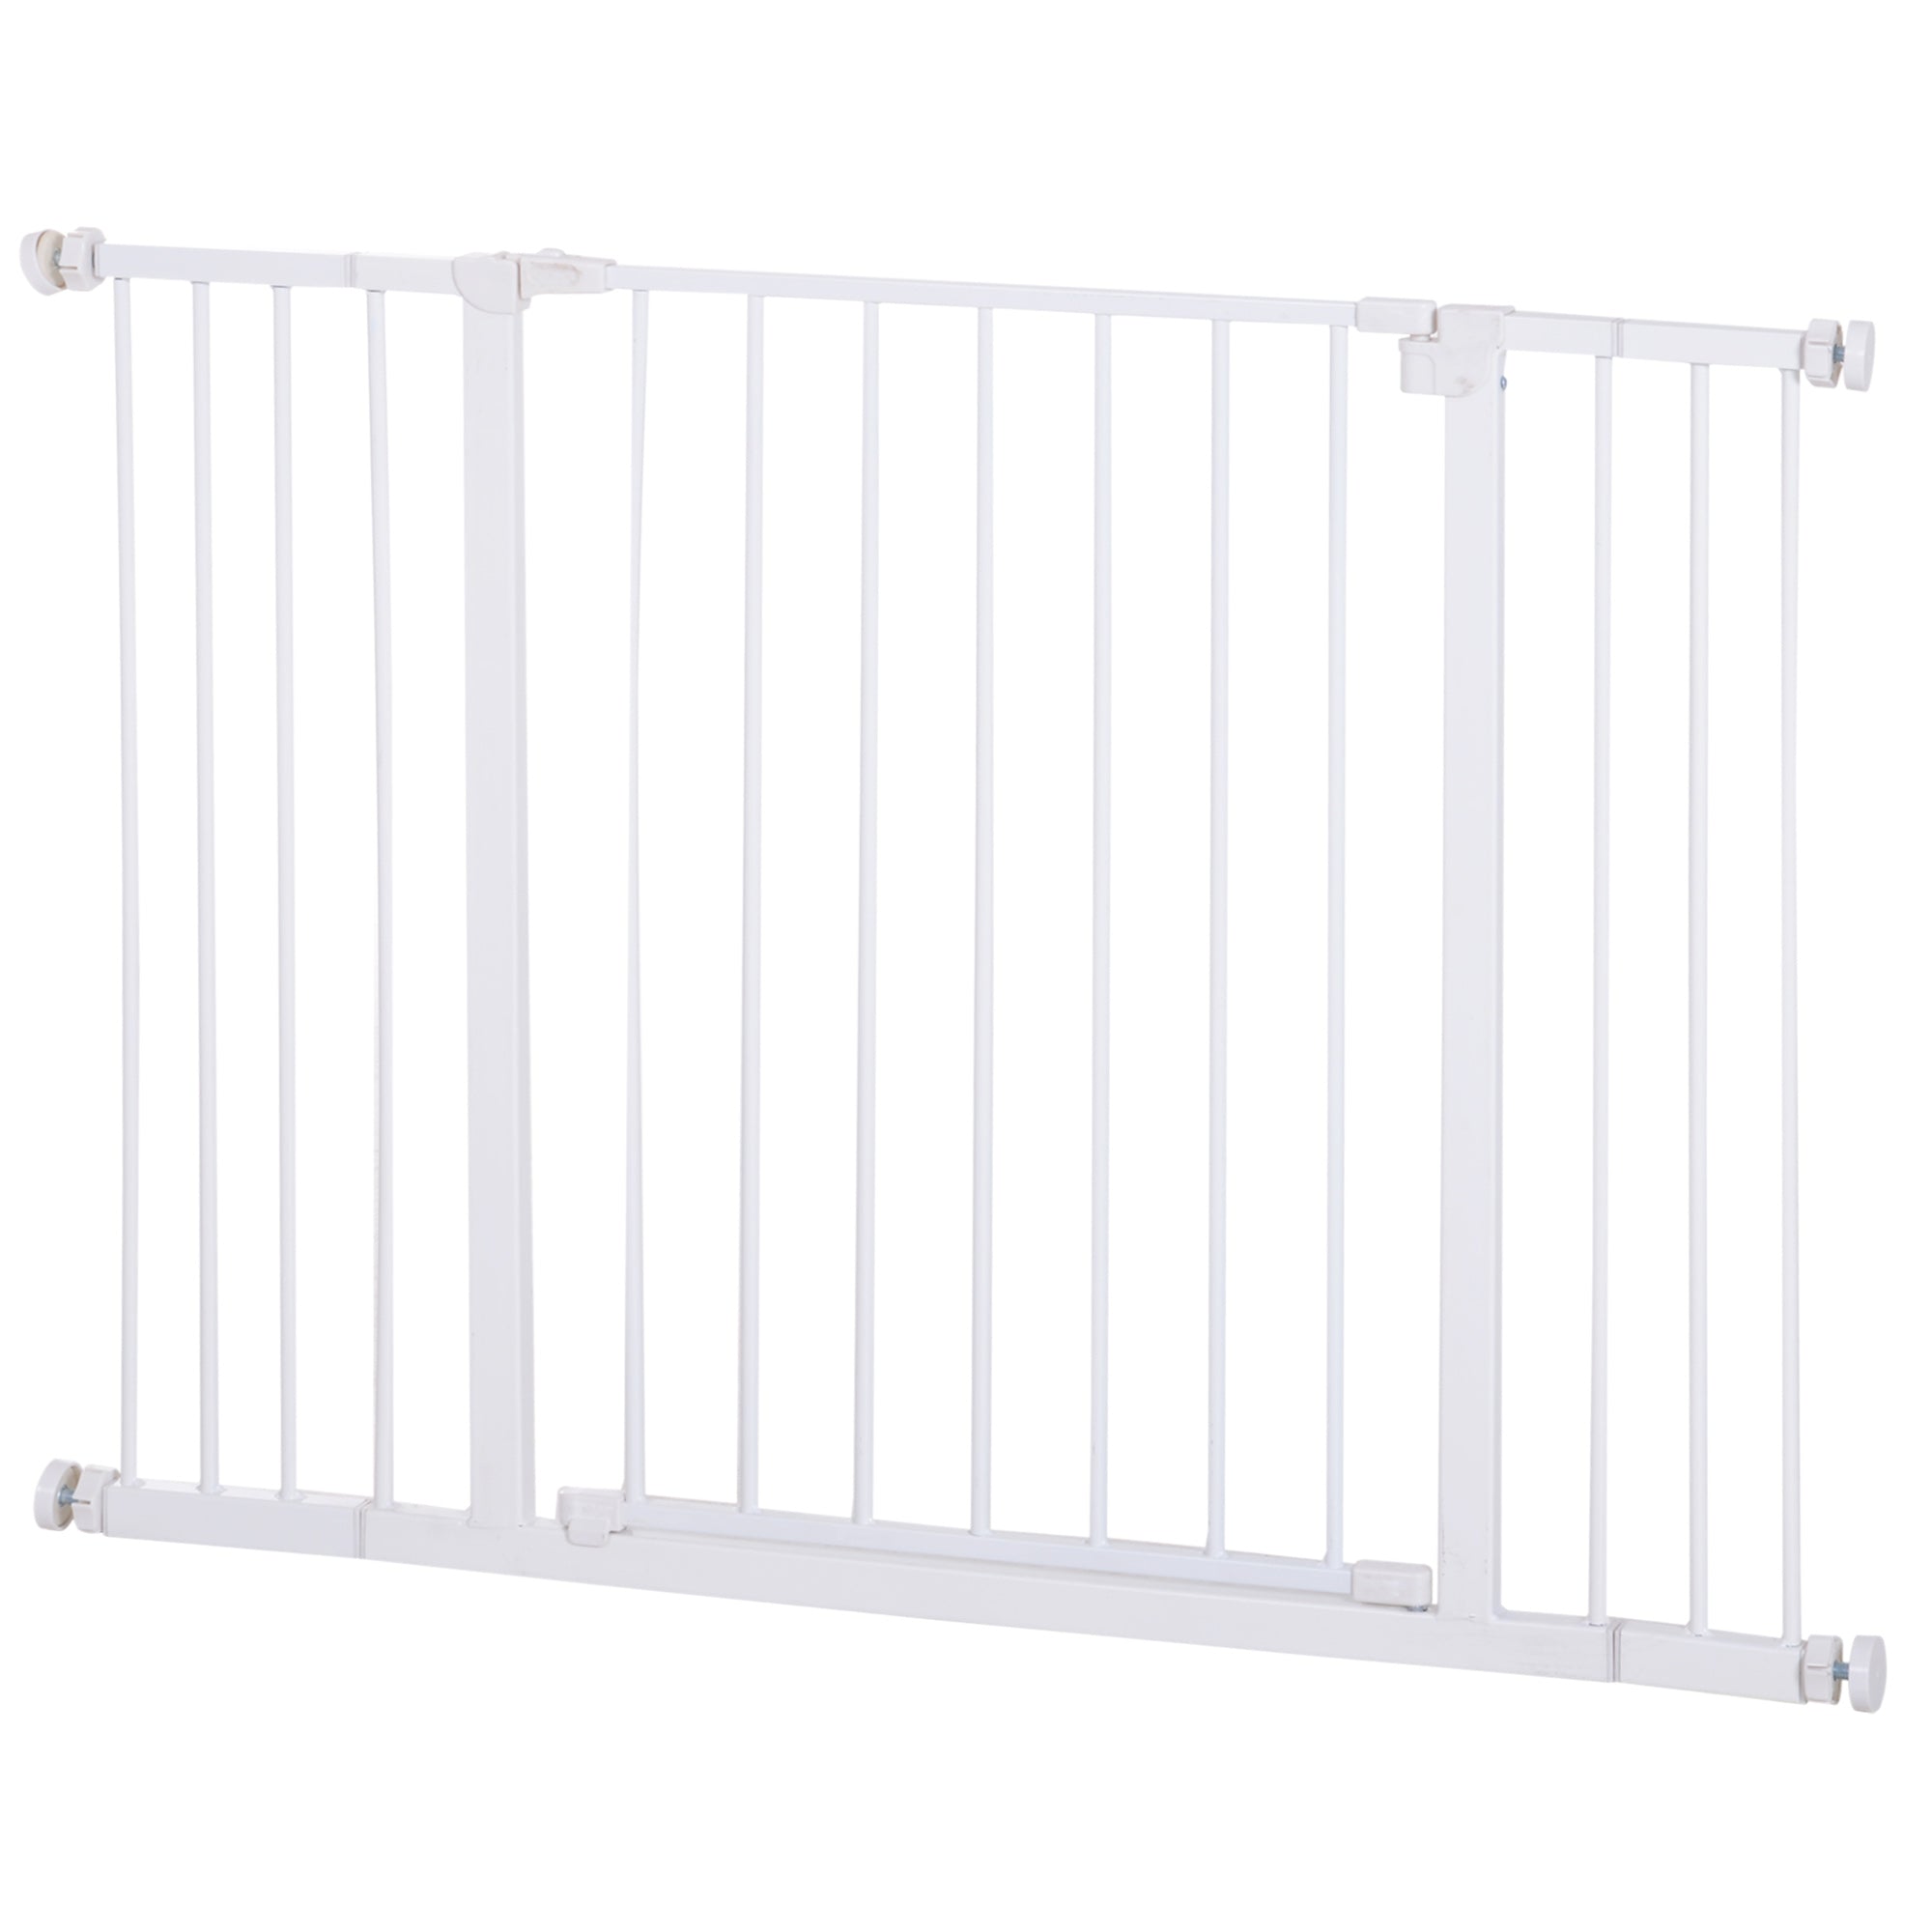 Pressure Fitted Pet Dog Safety Gate Metal Fence Extending 72-107cm Wide